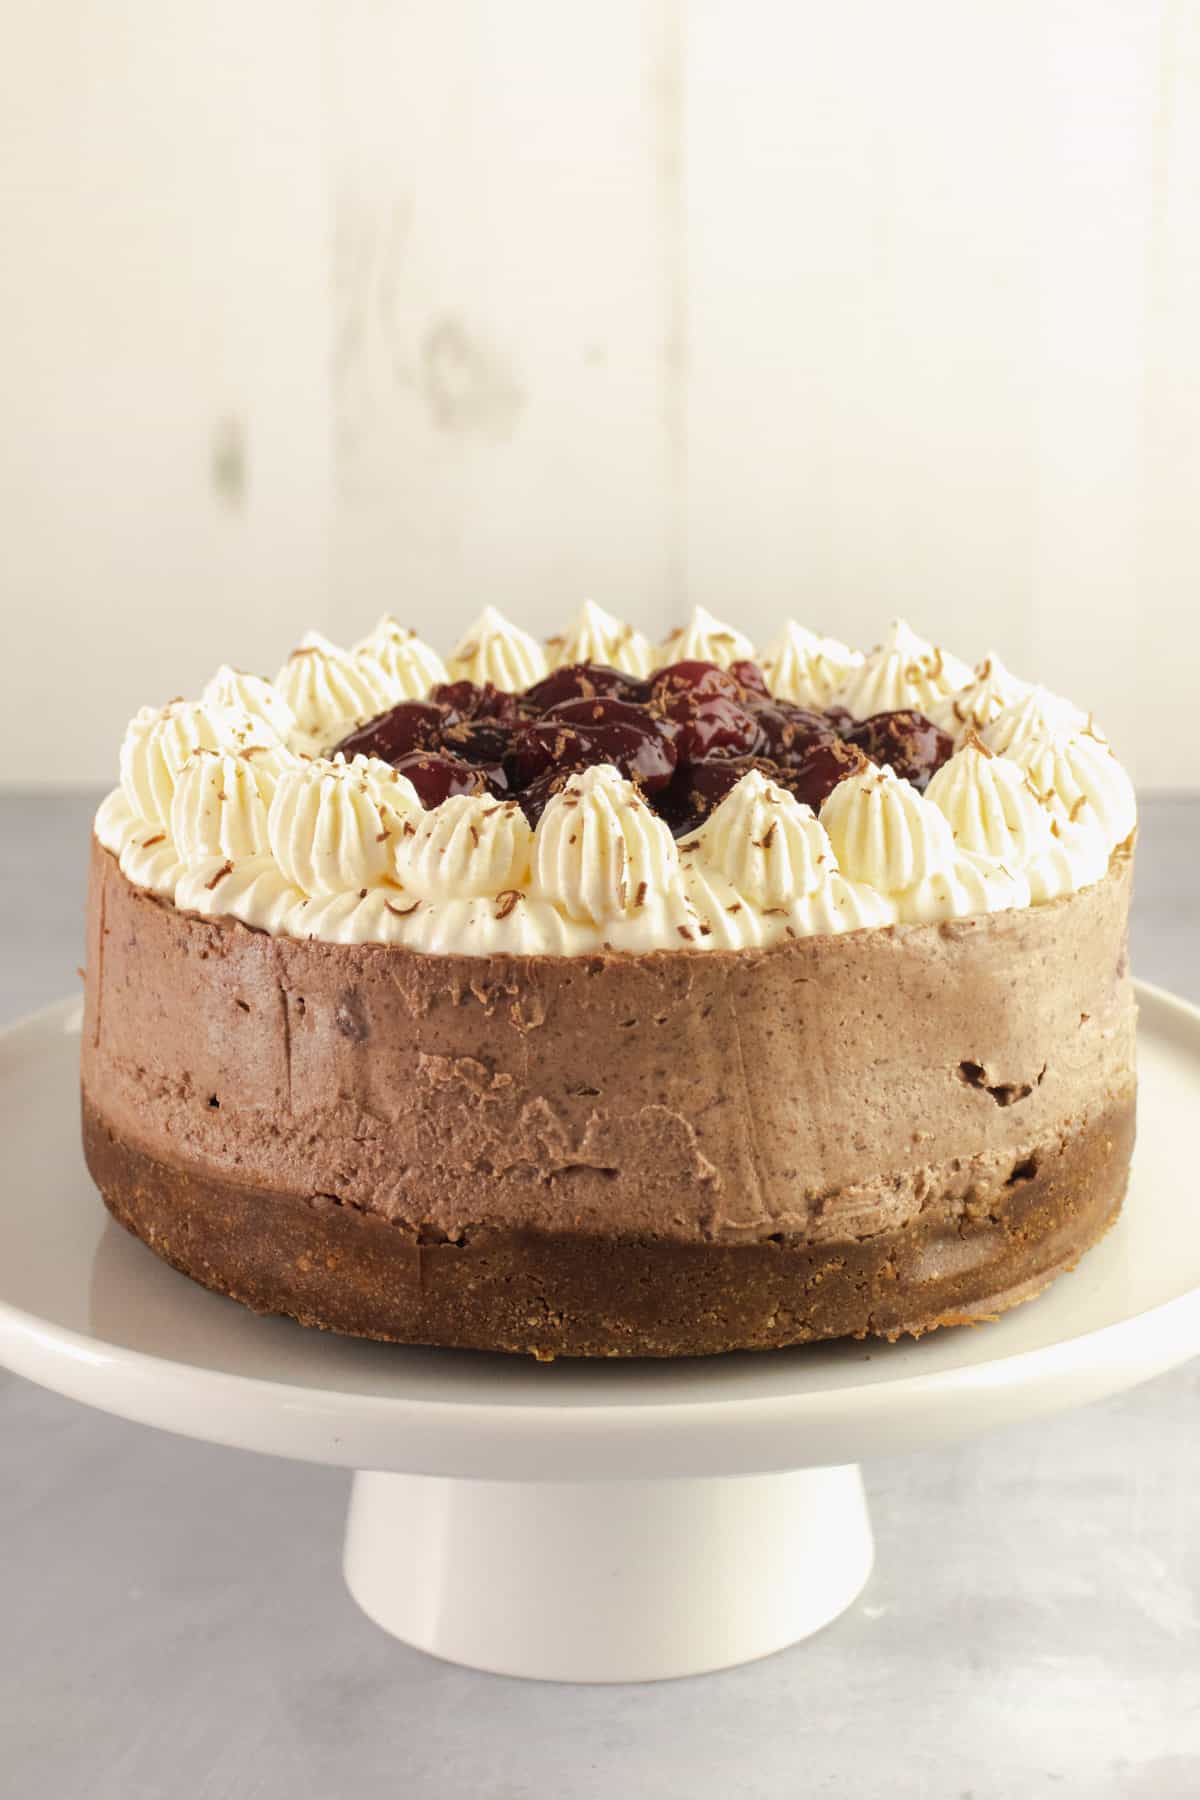 Chocolate cheesecake on a white cake stand with whipped cream topping and black cherries